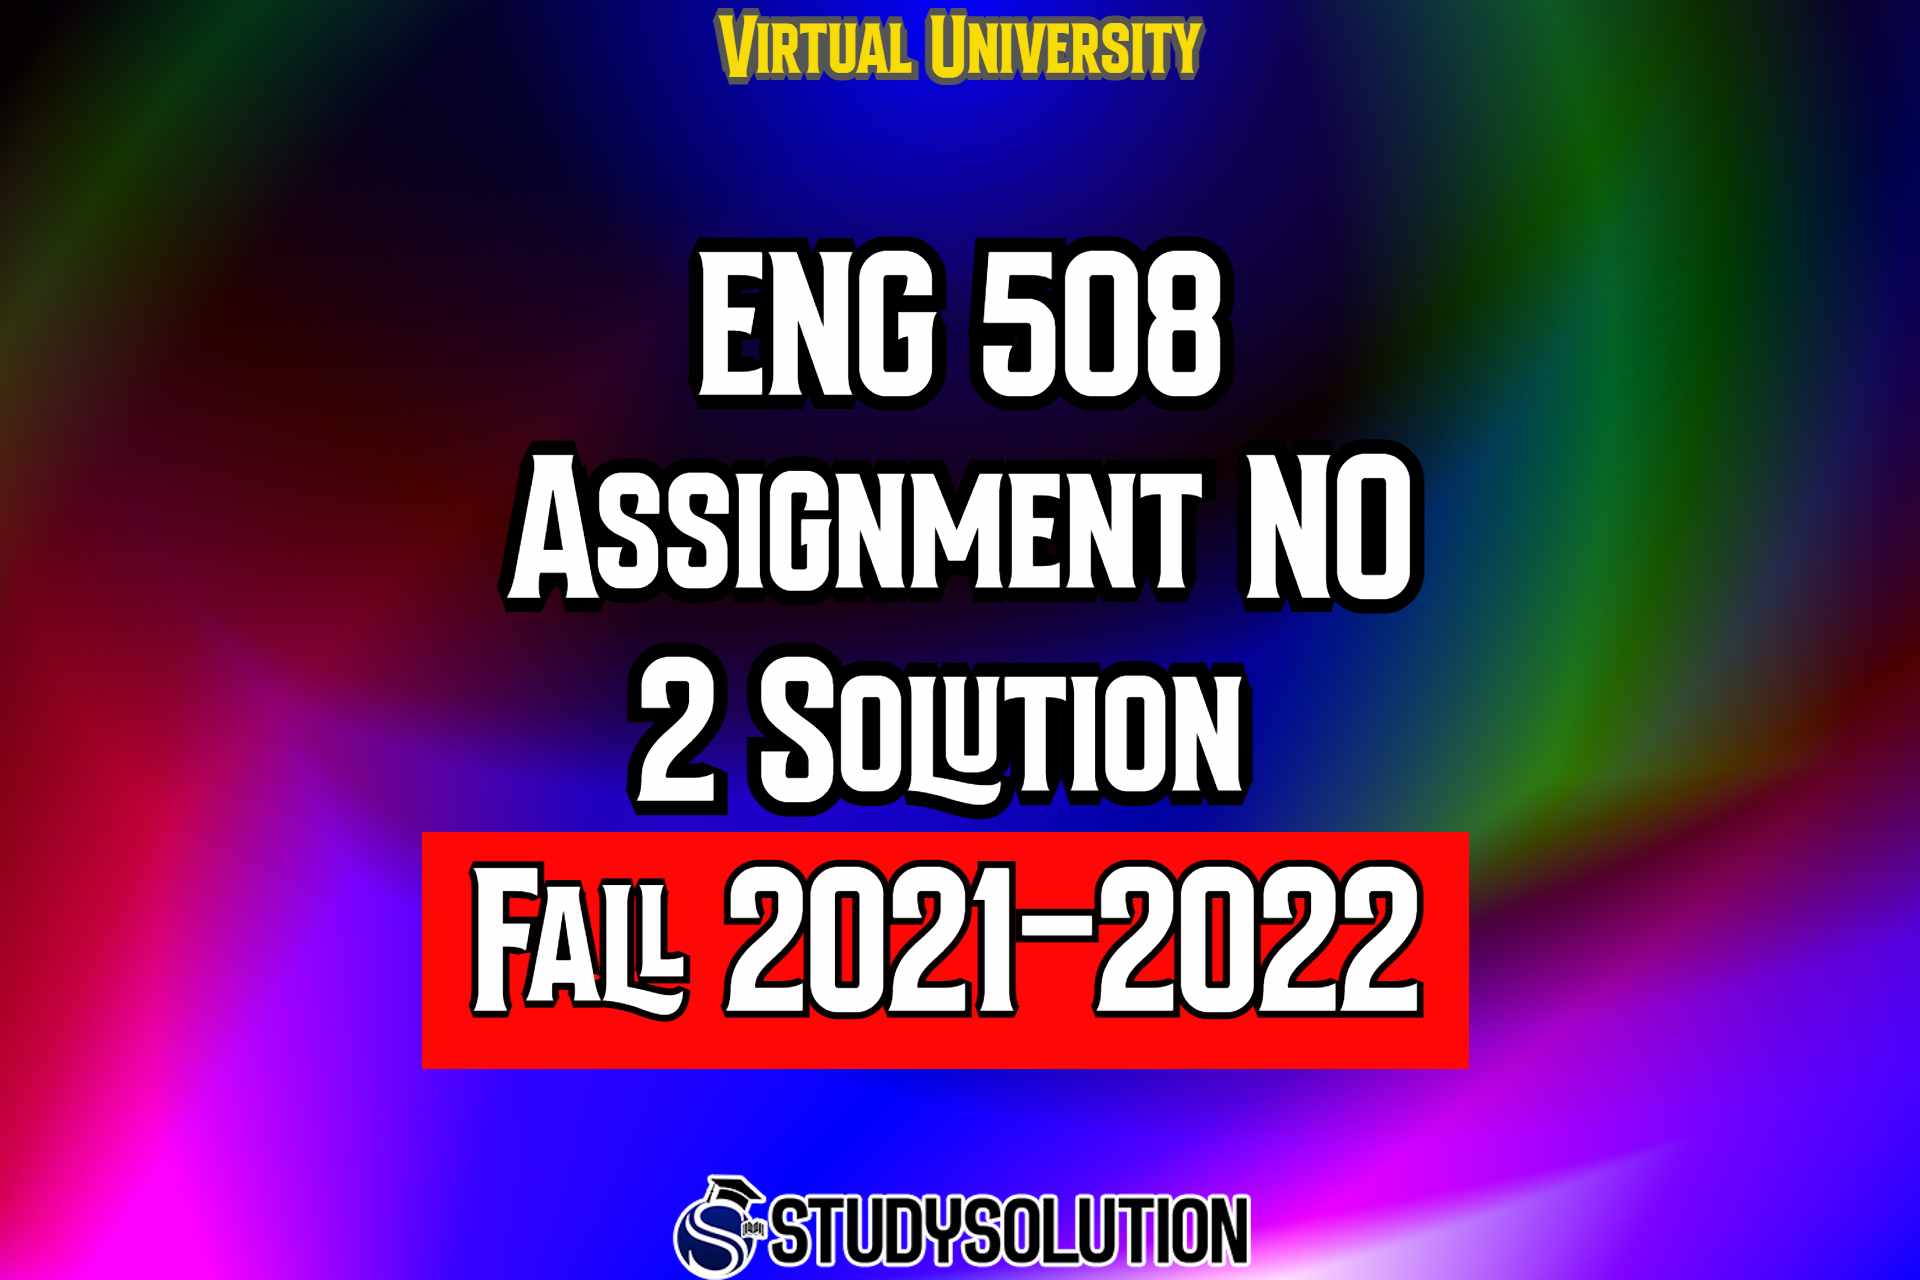 ENG508 Assignment No 2 Solution Fall 2022